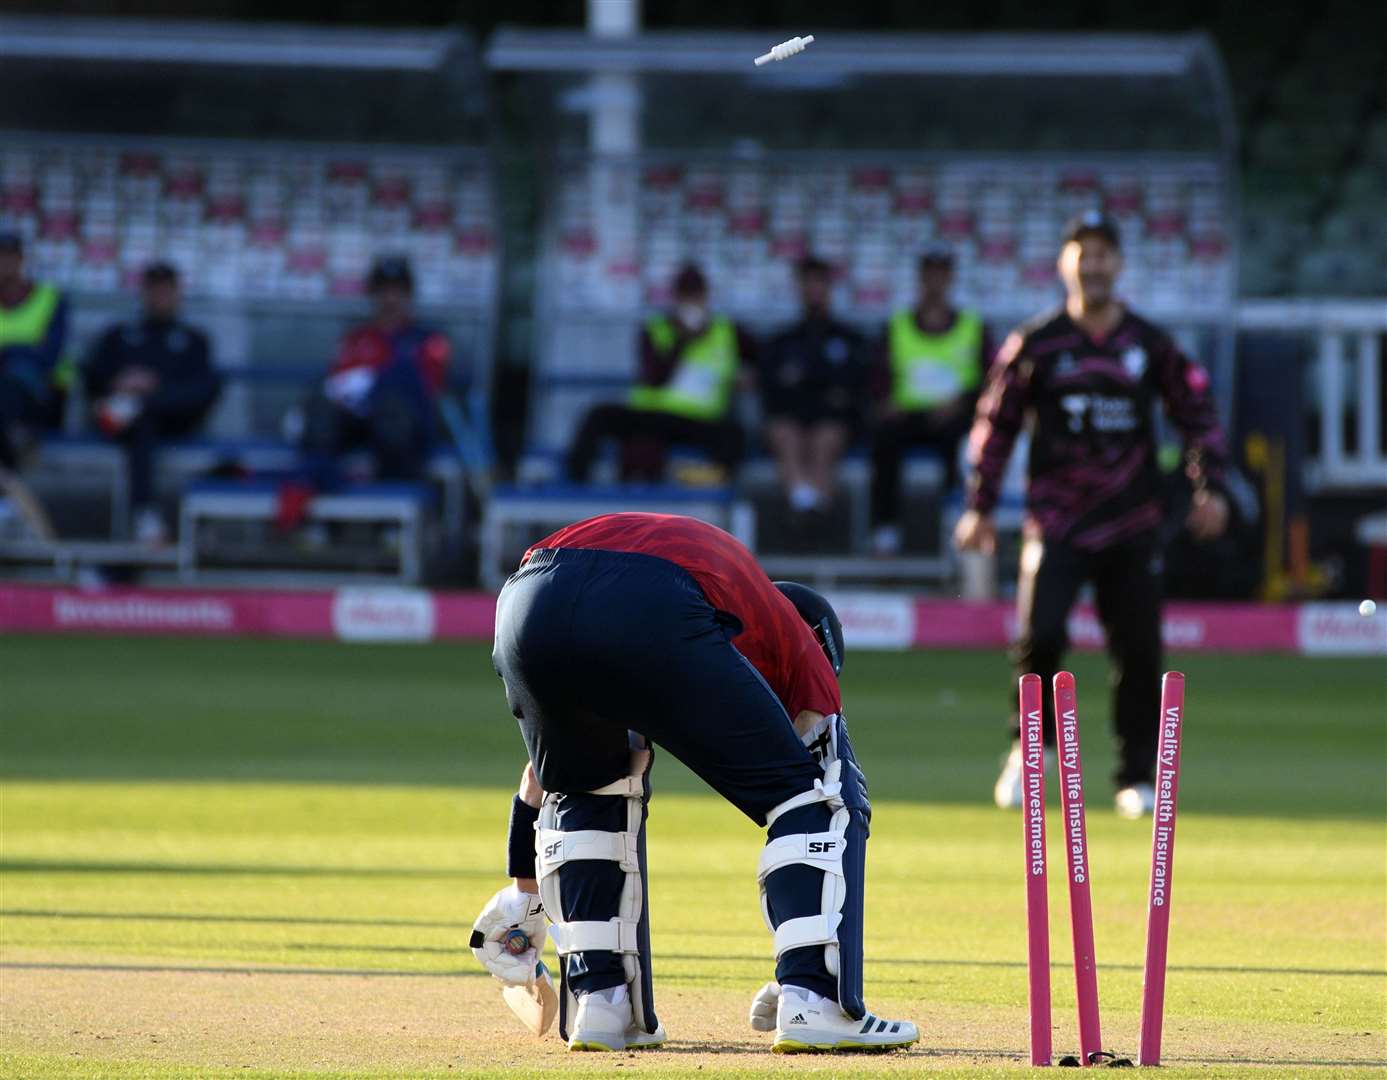 Kent's Joe Denly is bowled by one that kept low against Somerset. Picture: Barry Goodwin